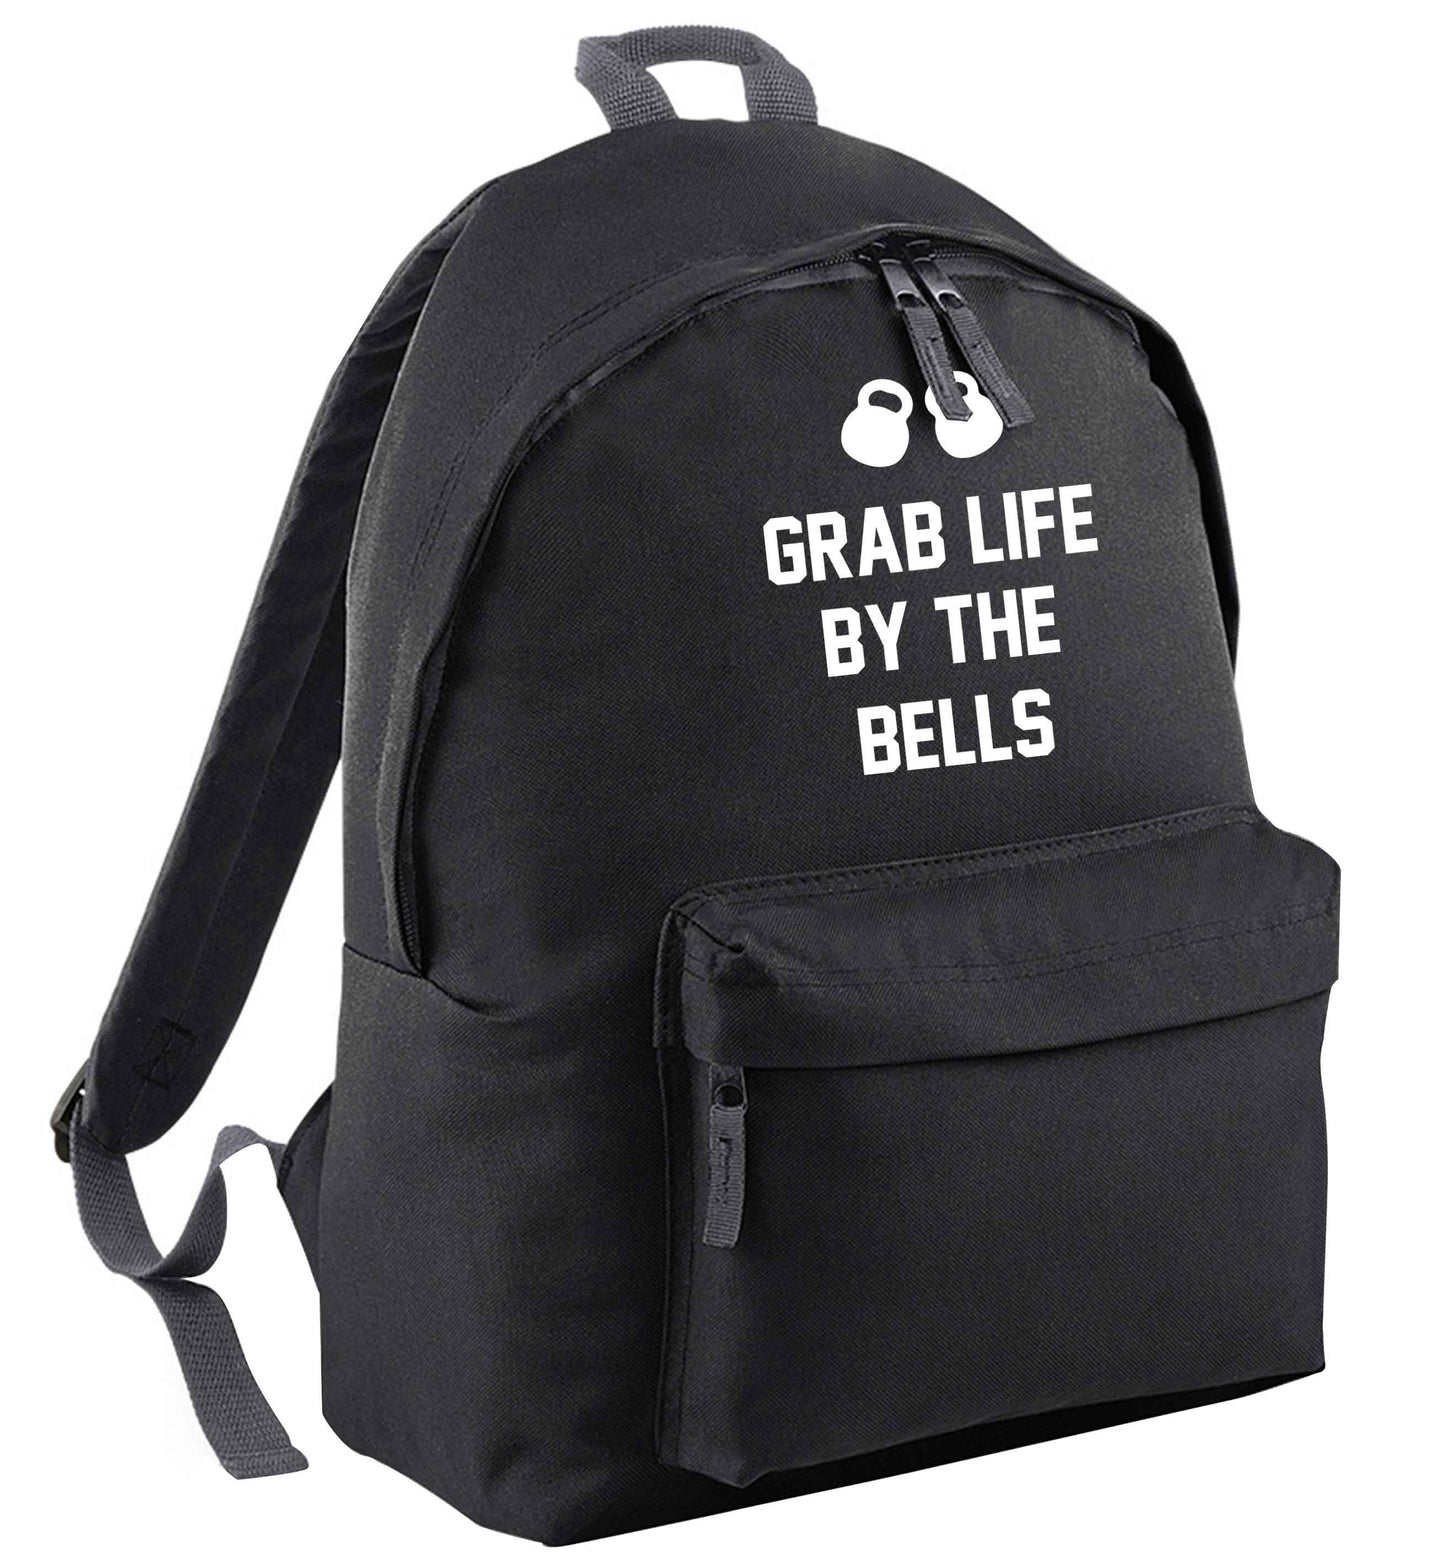 Grab life by the bells black adults backpack